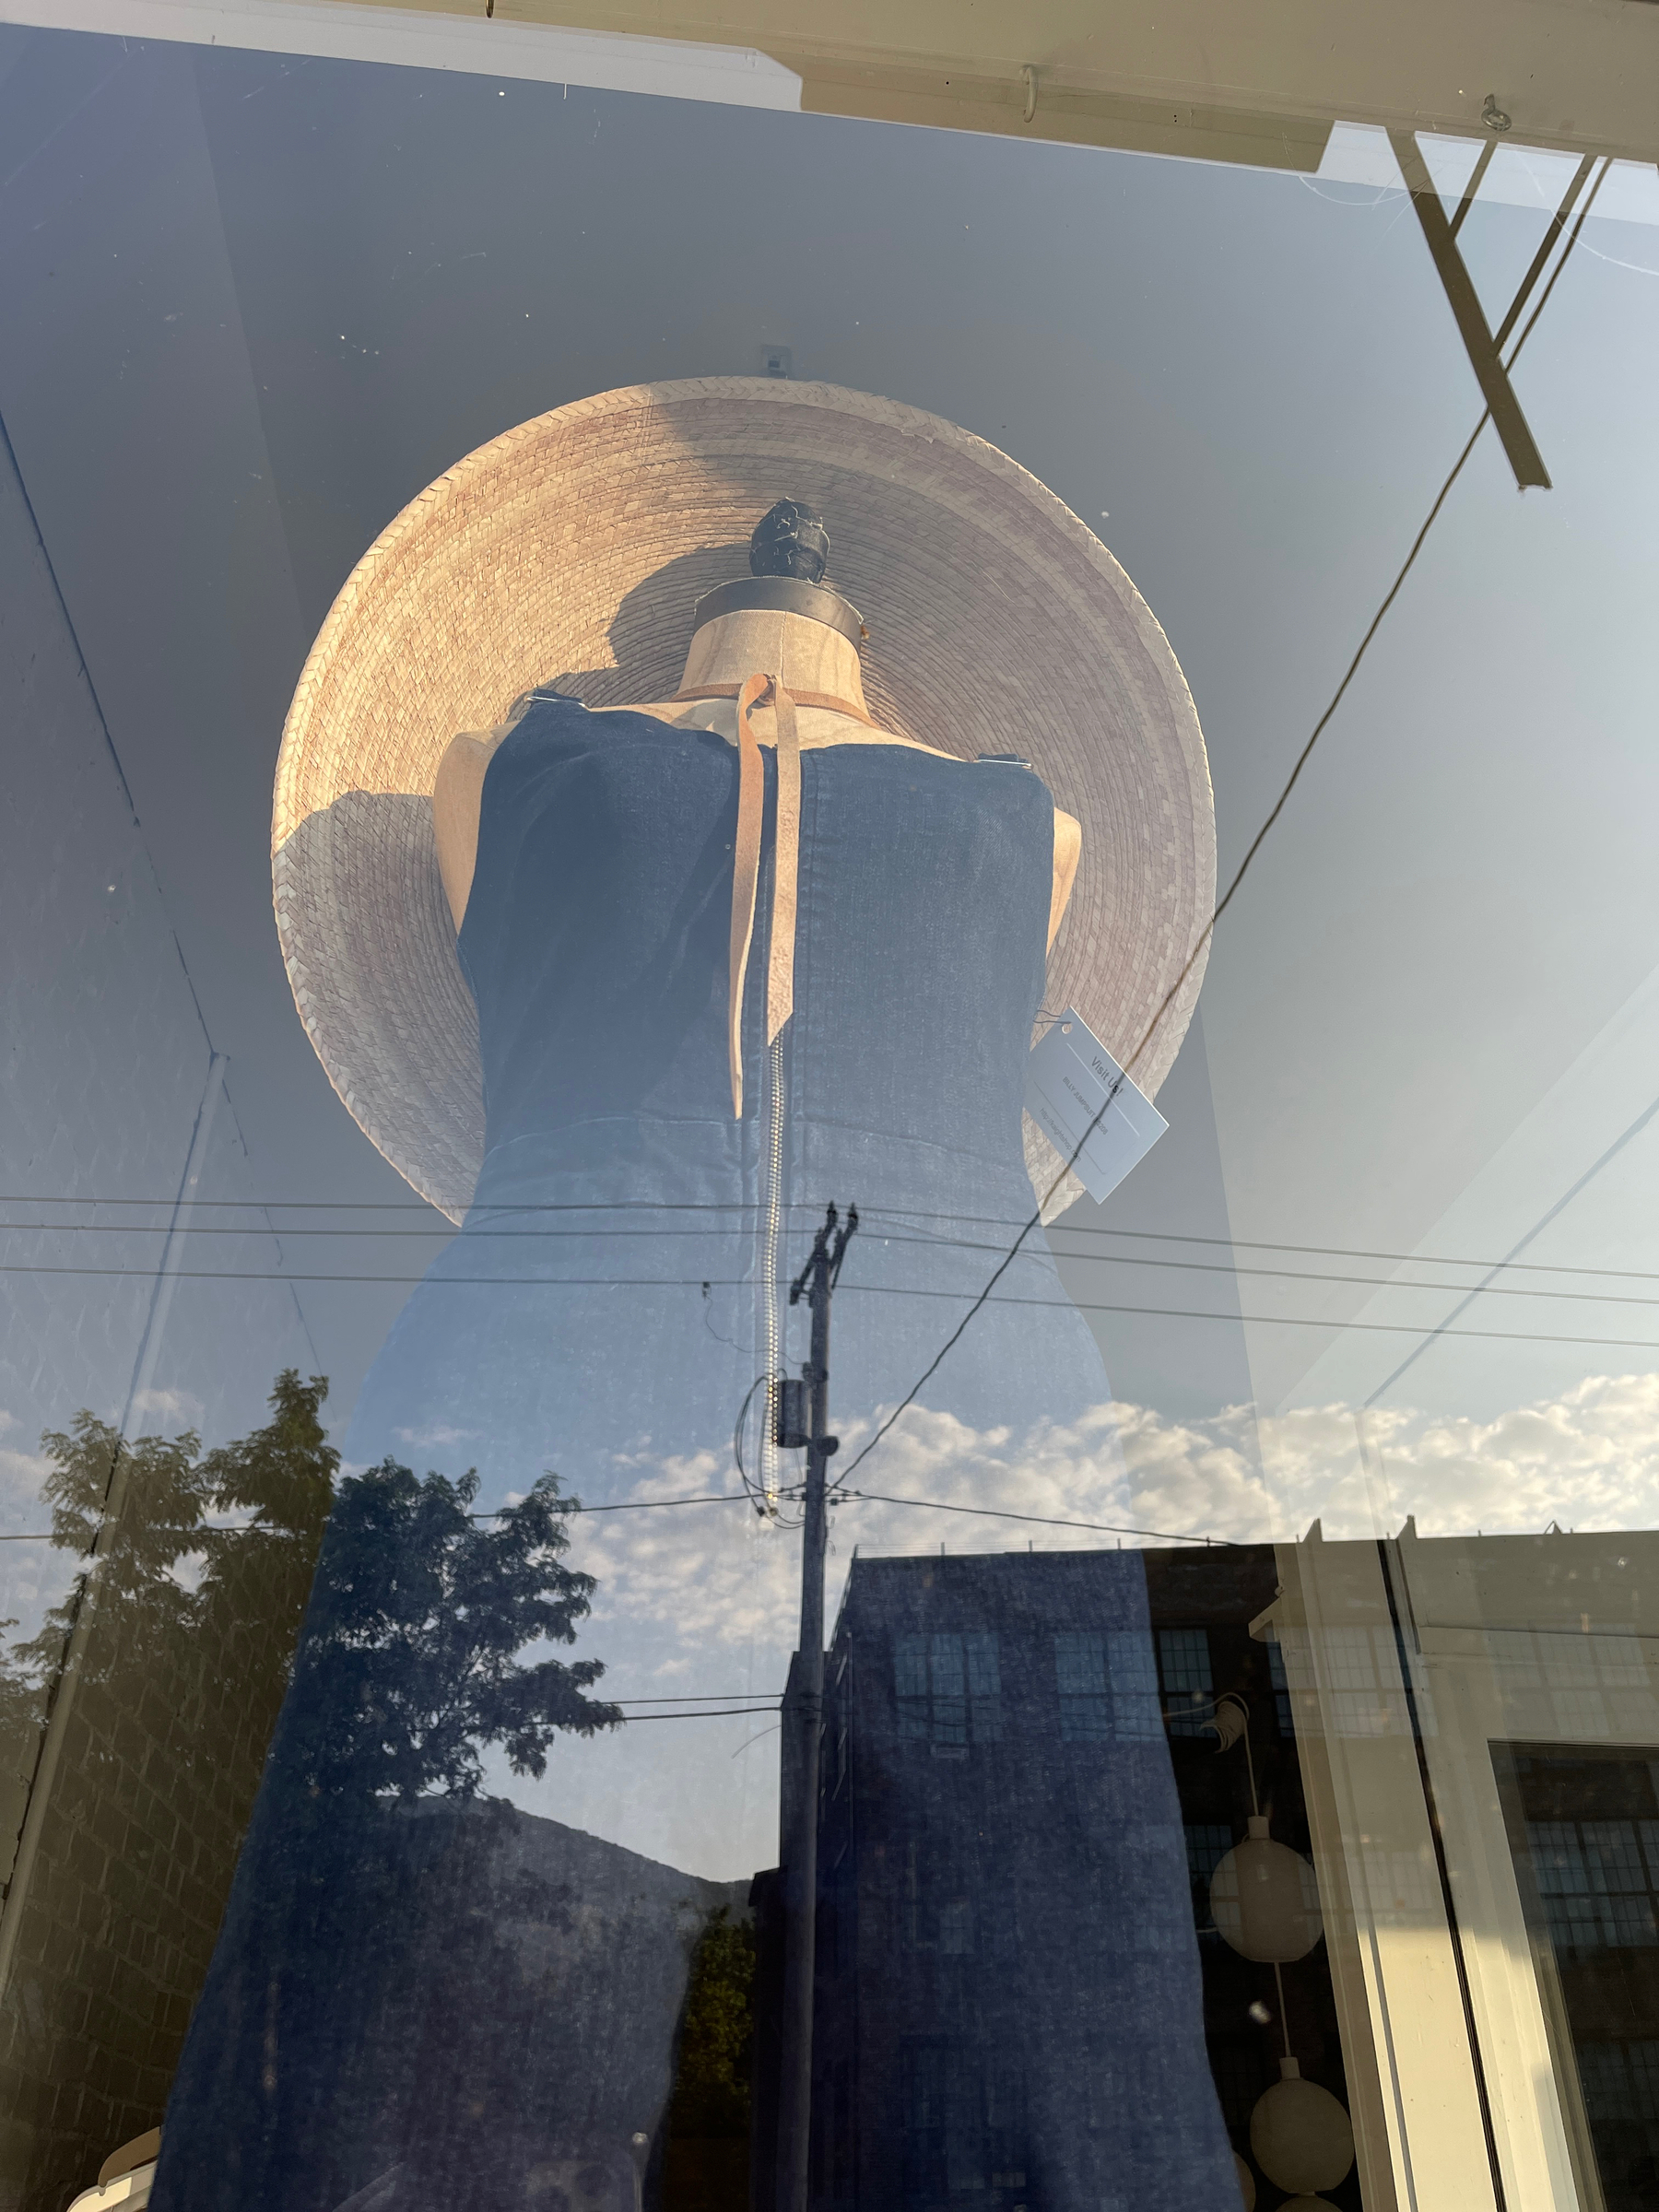 Women’s bluejeans jump suit with large wide brim woven hat on mannequin in a shop window. Sky clouds and buildings reflection overlaid.